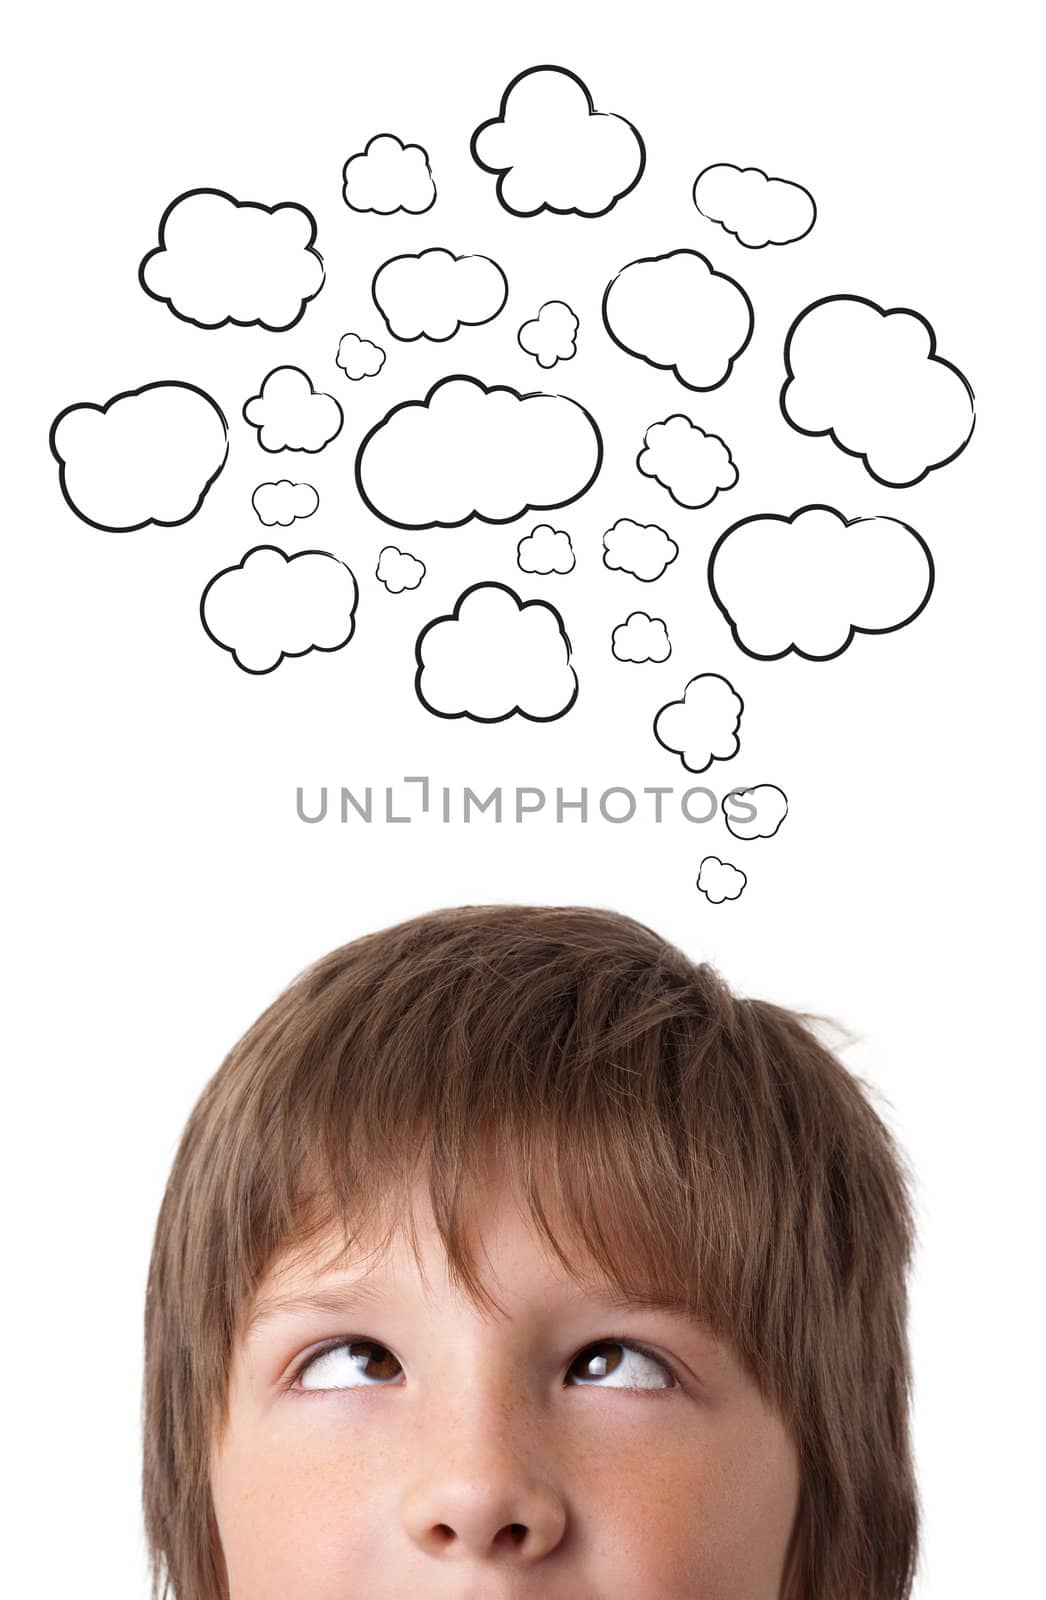 Young head thinking with clouds by ra2studio